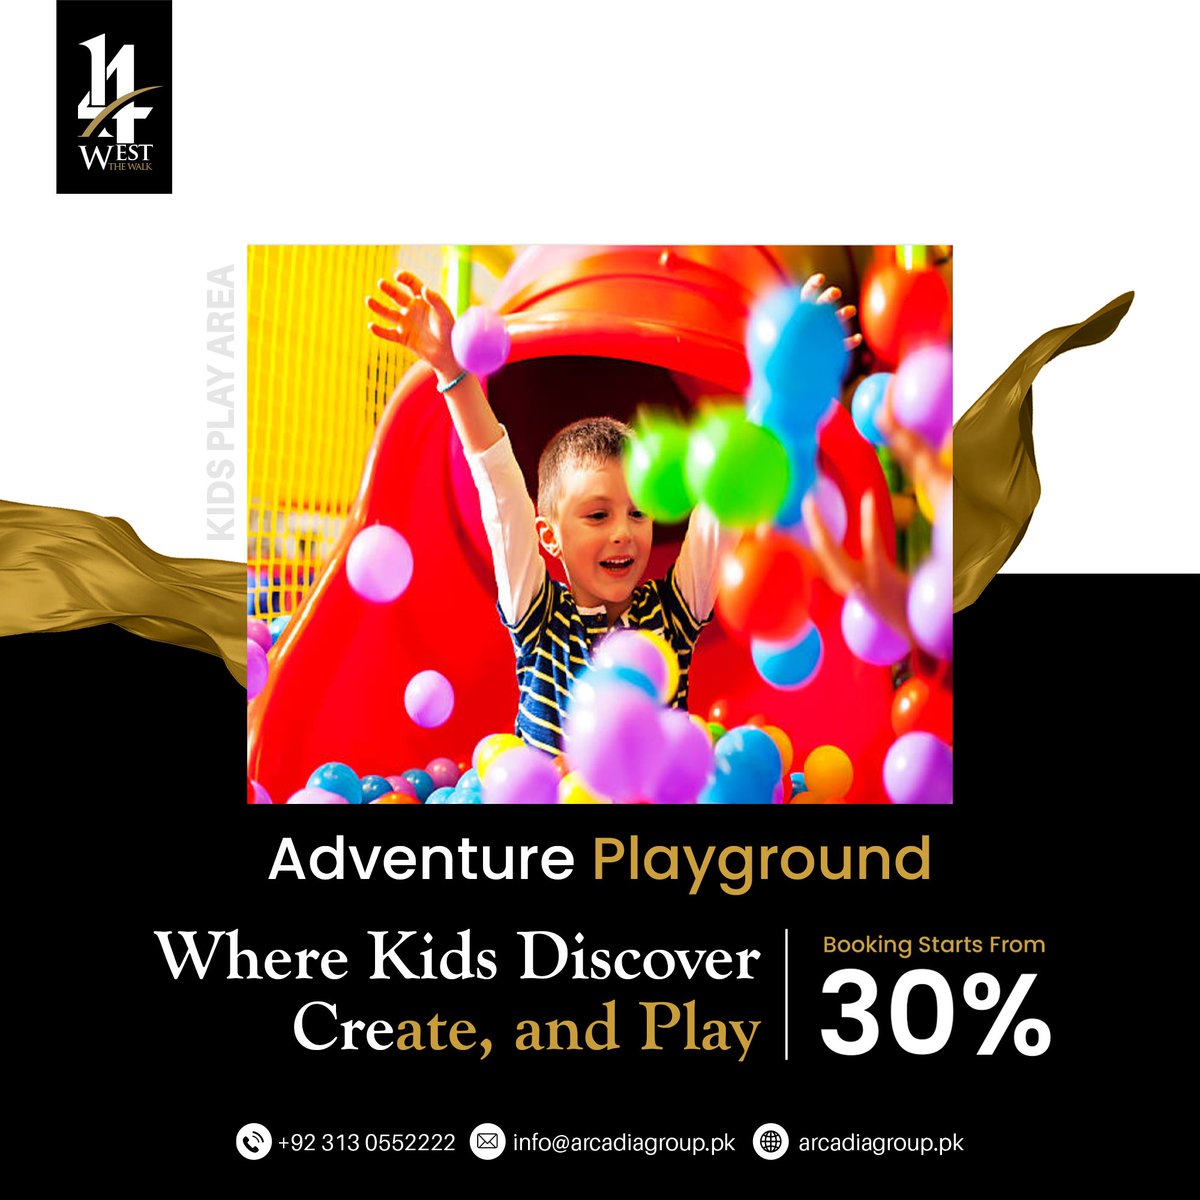 Unlocking a World of Fun and Learning! 🌟 Join us in creating the ultimate kids' play area at 14 West The Walk. Invest in the joy of childhood today. 🏰🎈 #InvestInPlay #14westthewalk
.
.
.
Contact Us:
0313-0552222
Info@arcadiagroup.pk
arcadiagroup.pk